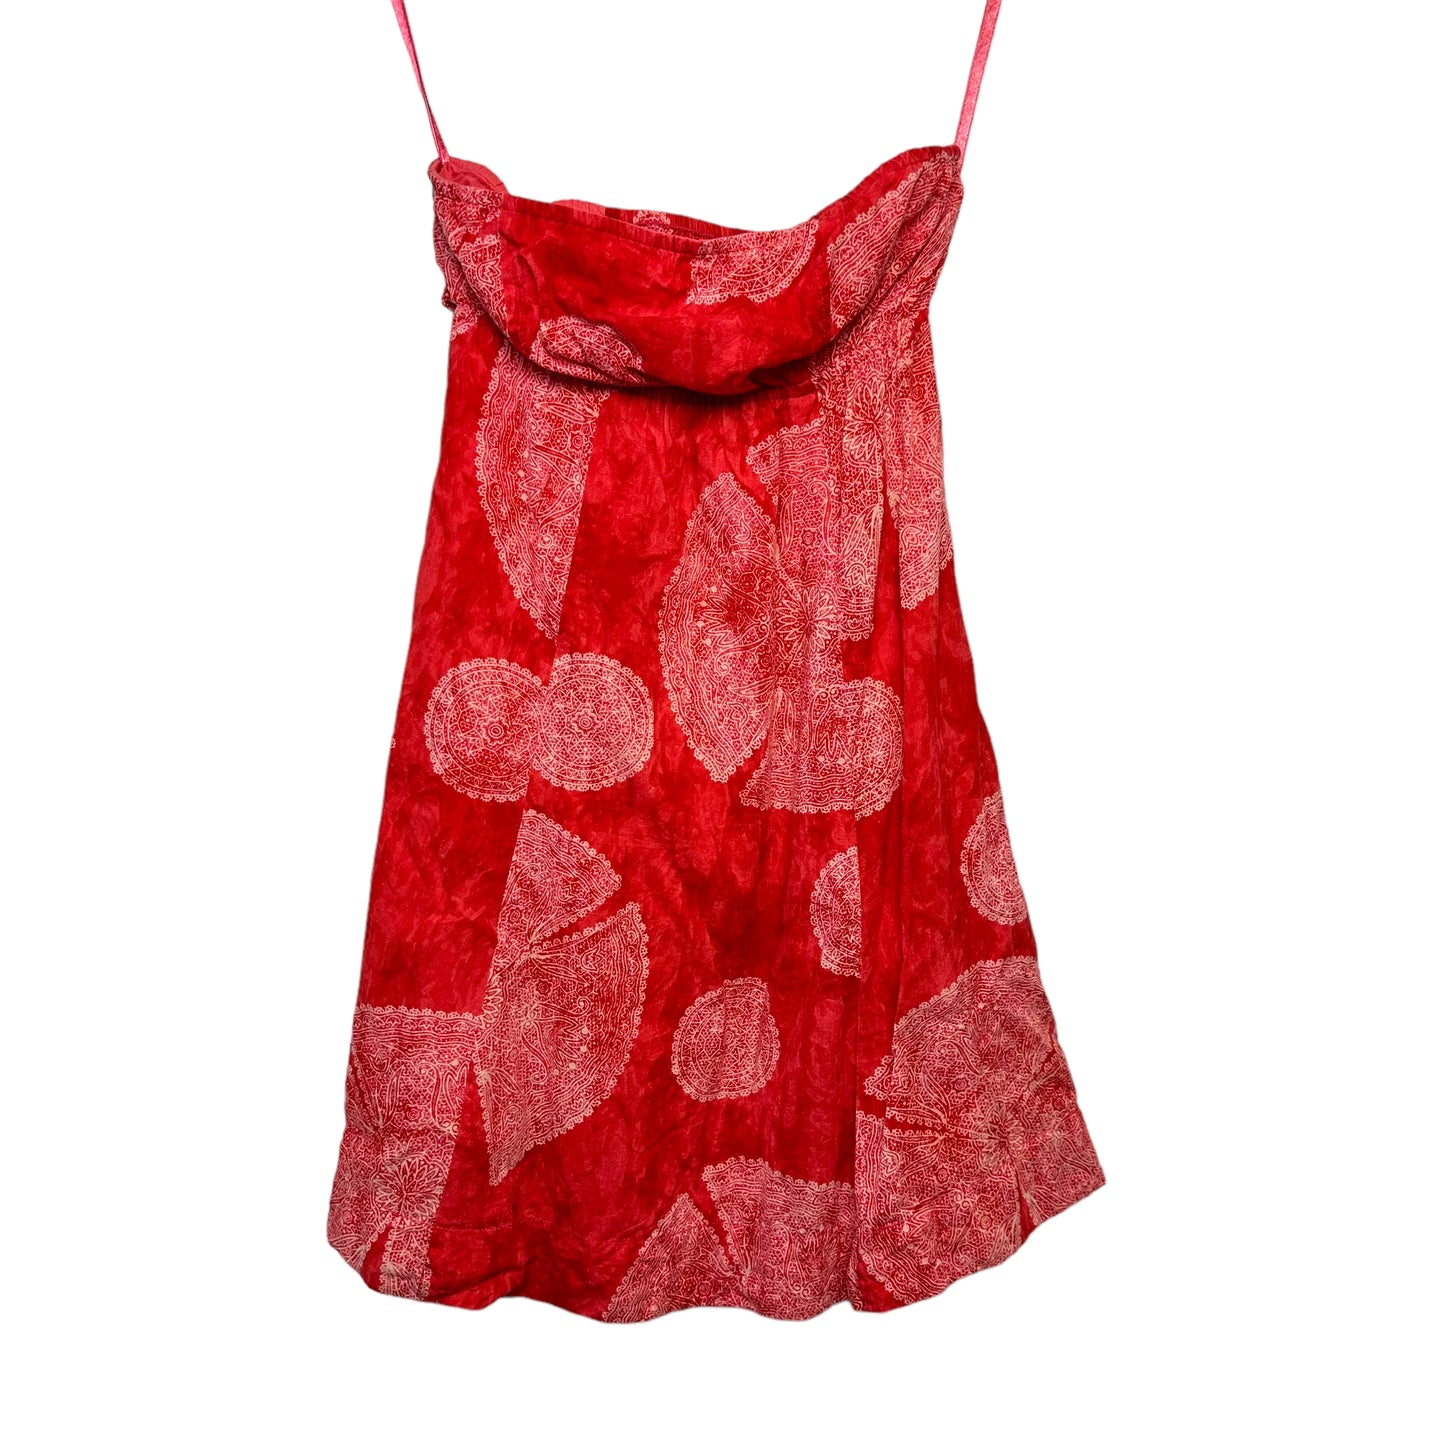 Y2K Free People Strapless Mini Dress Tunic Top Red 4